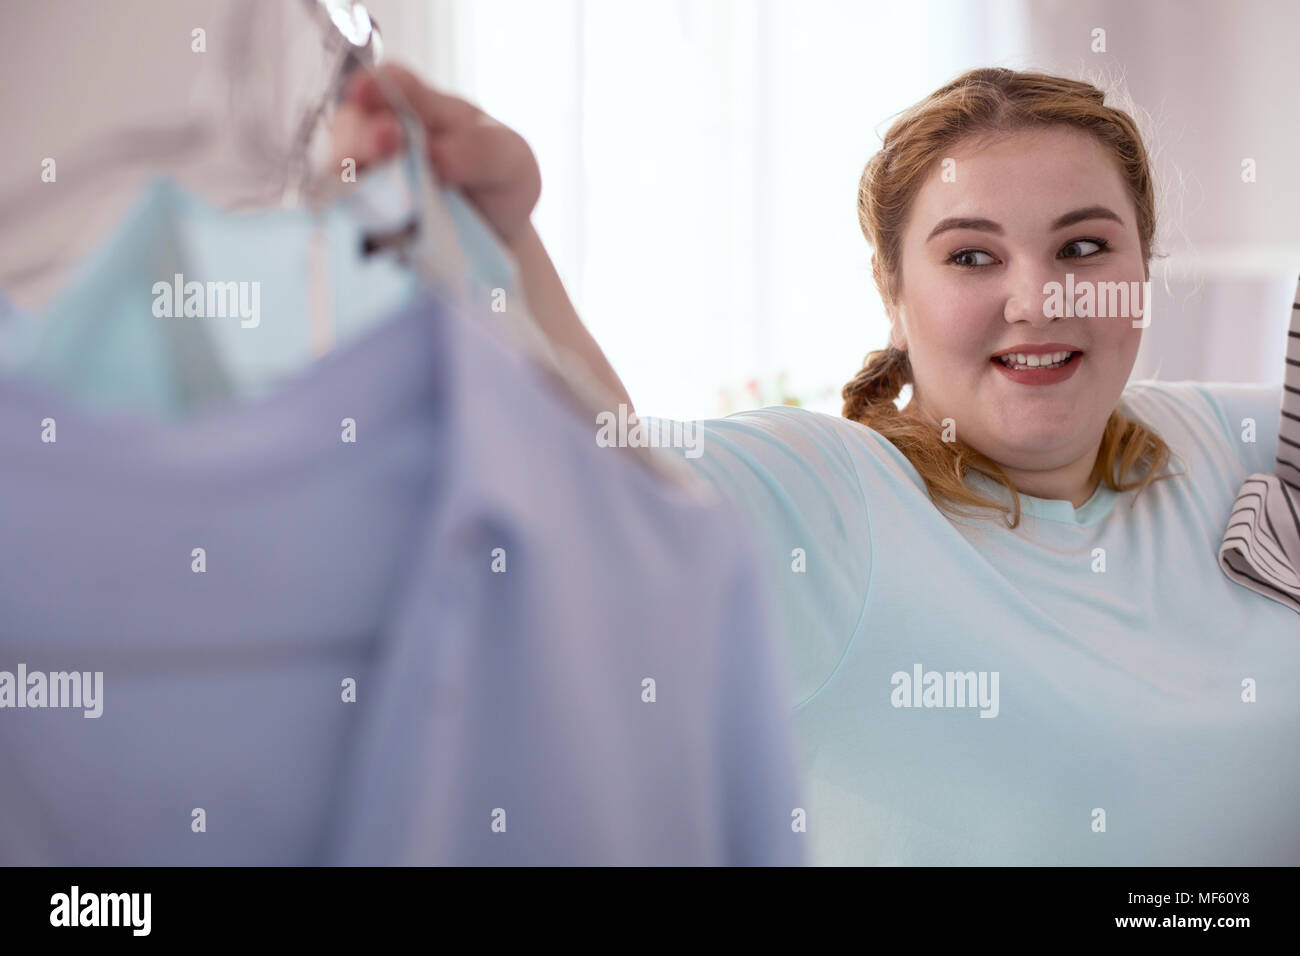 Surprised young woman enjoying her new finding Stock Photo